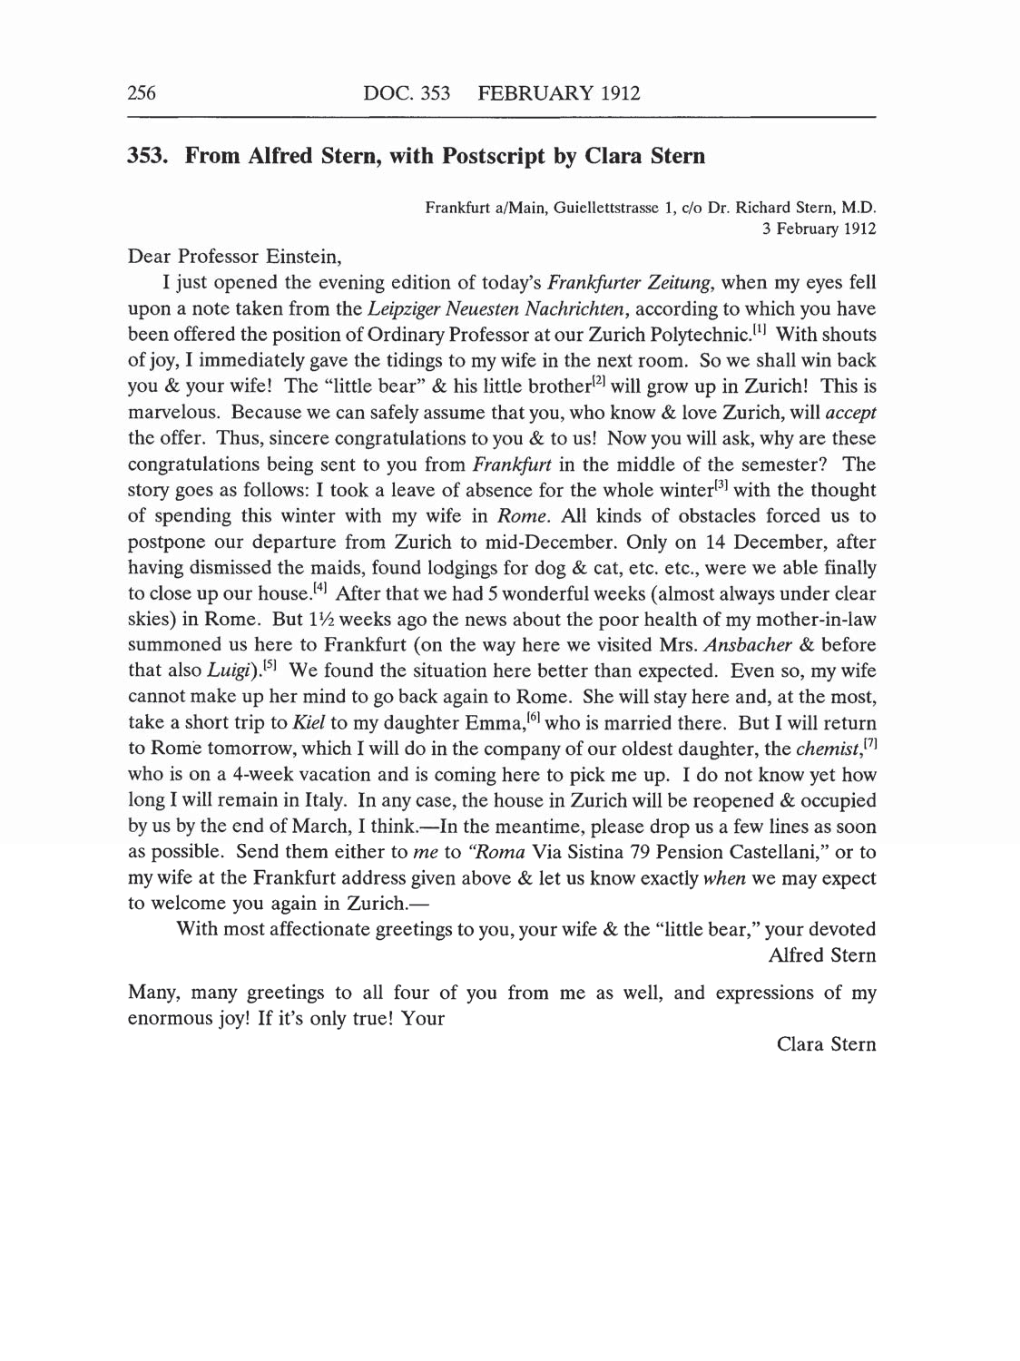 Volume 5: The Swiss Years: Correspondence, 1902-1914 (English translation supplement) page 256